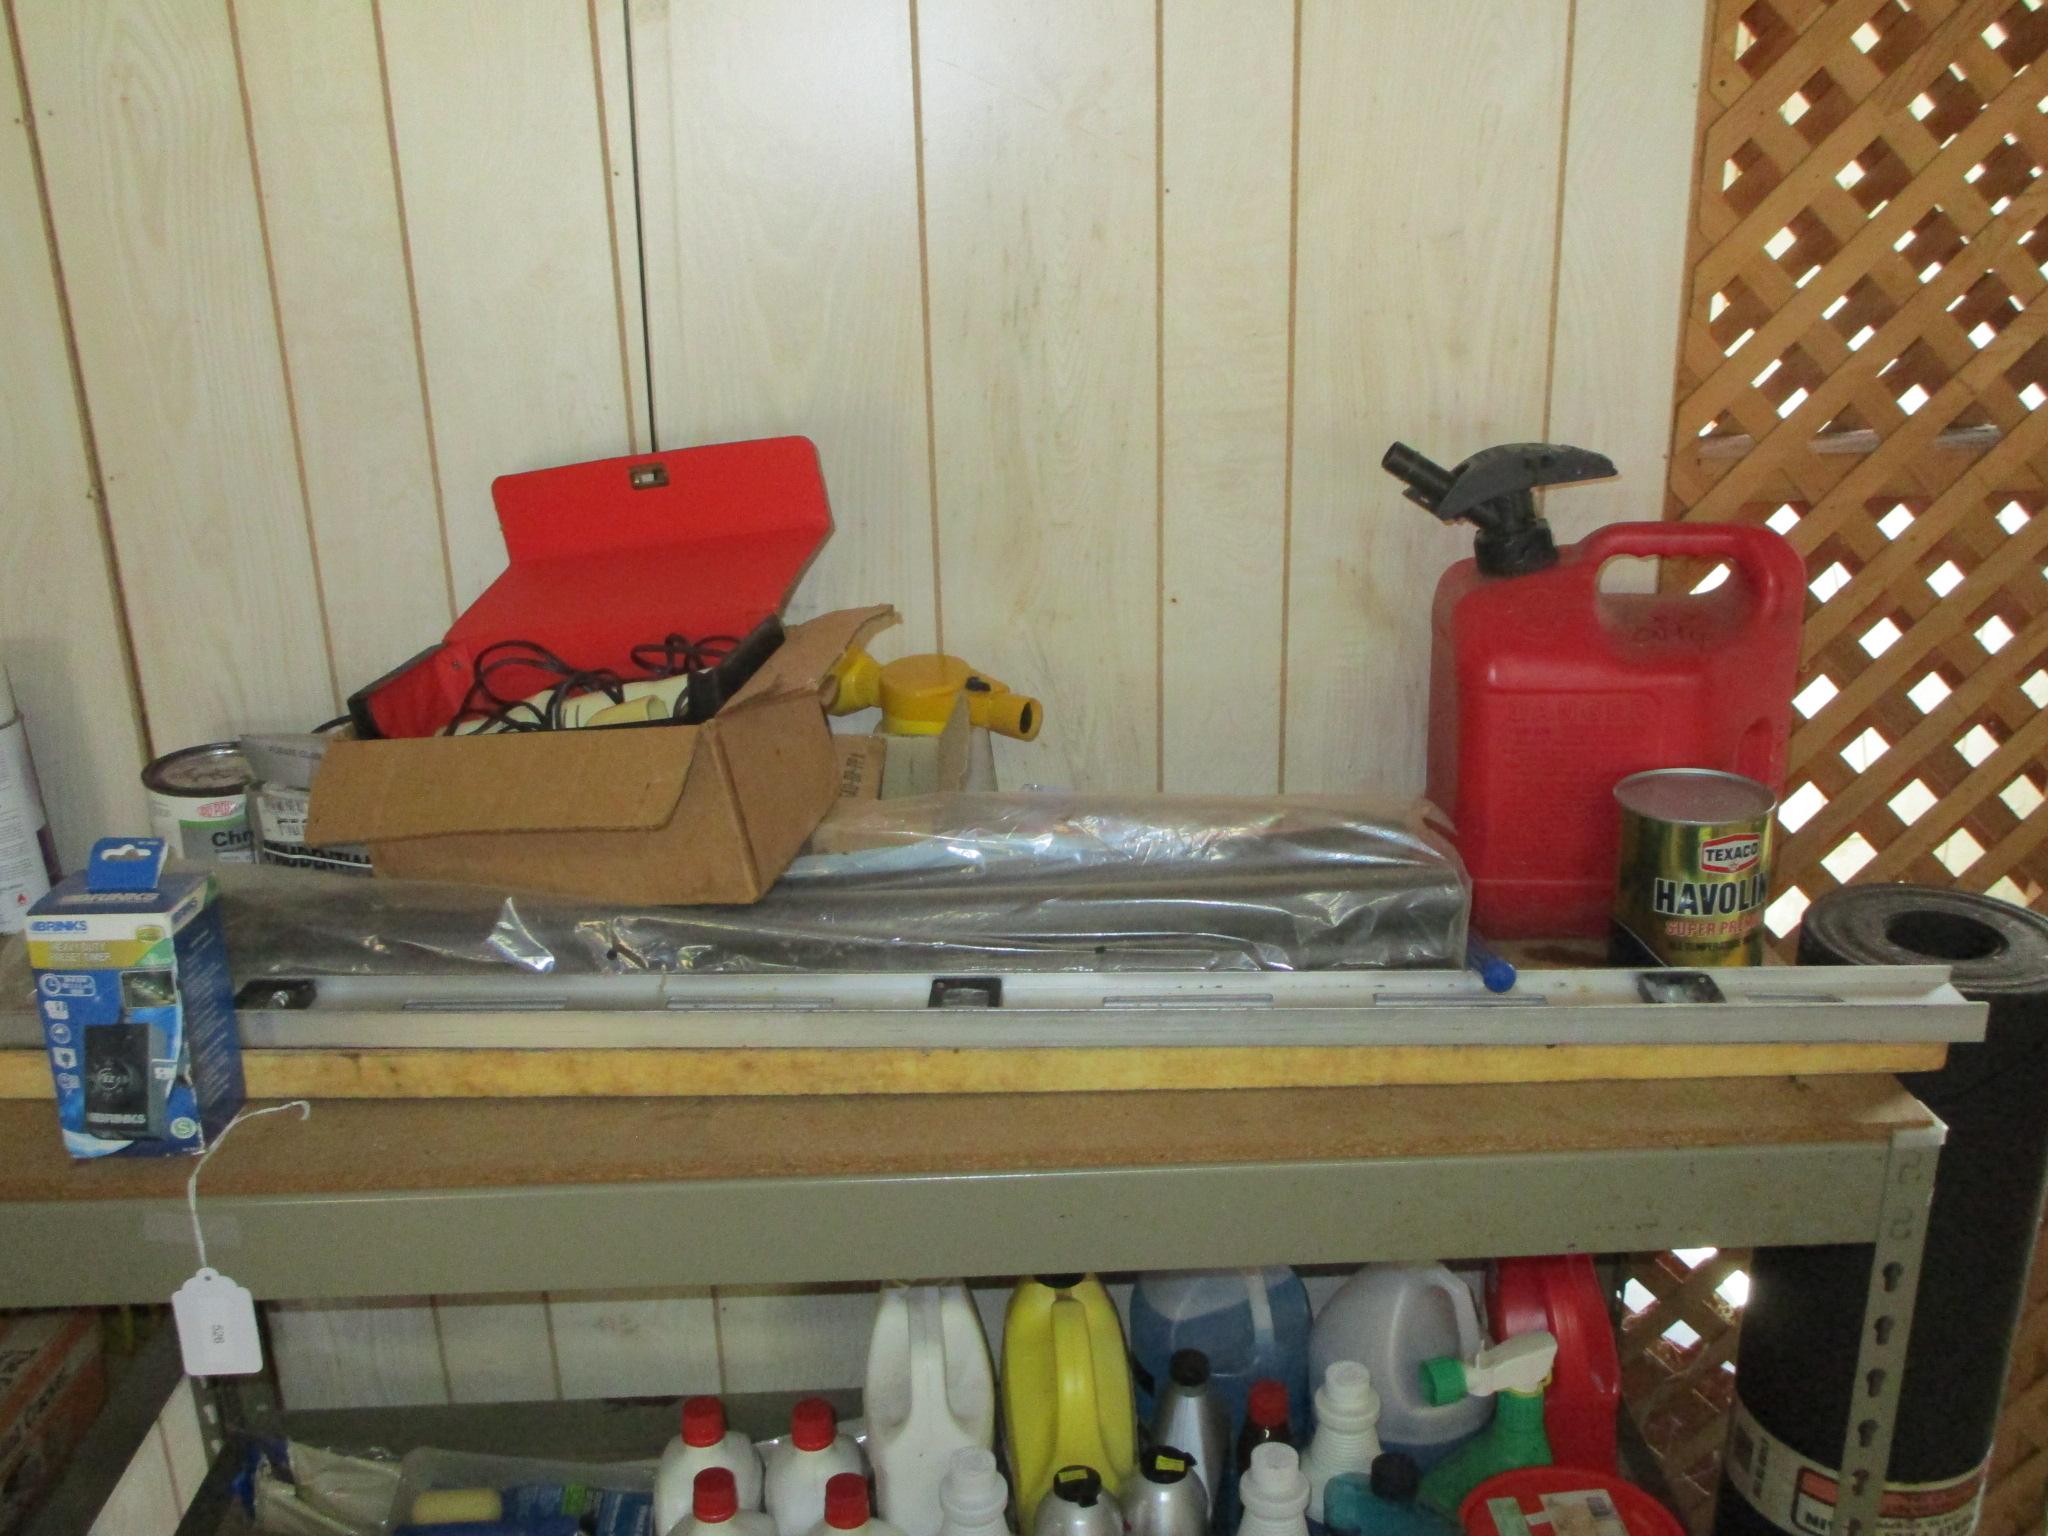 Great Garage Shelf Lot - see all pictures